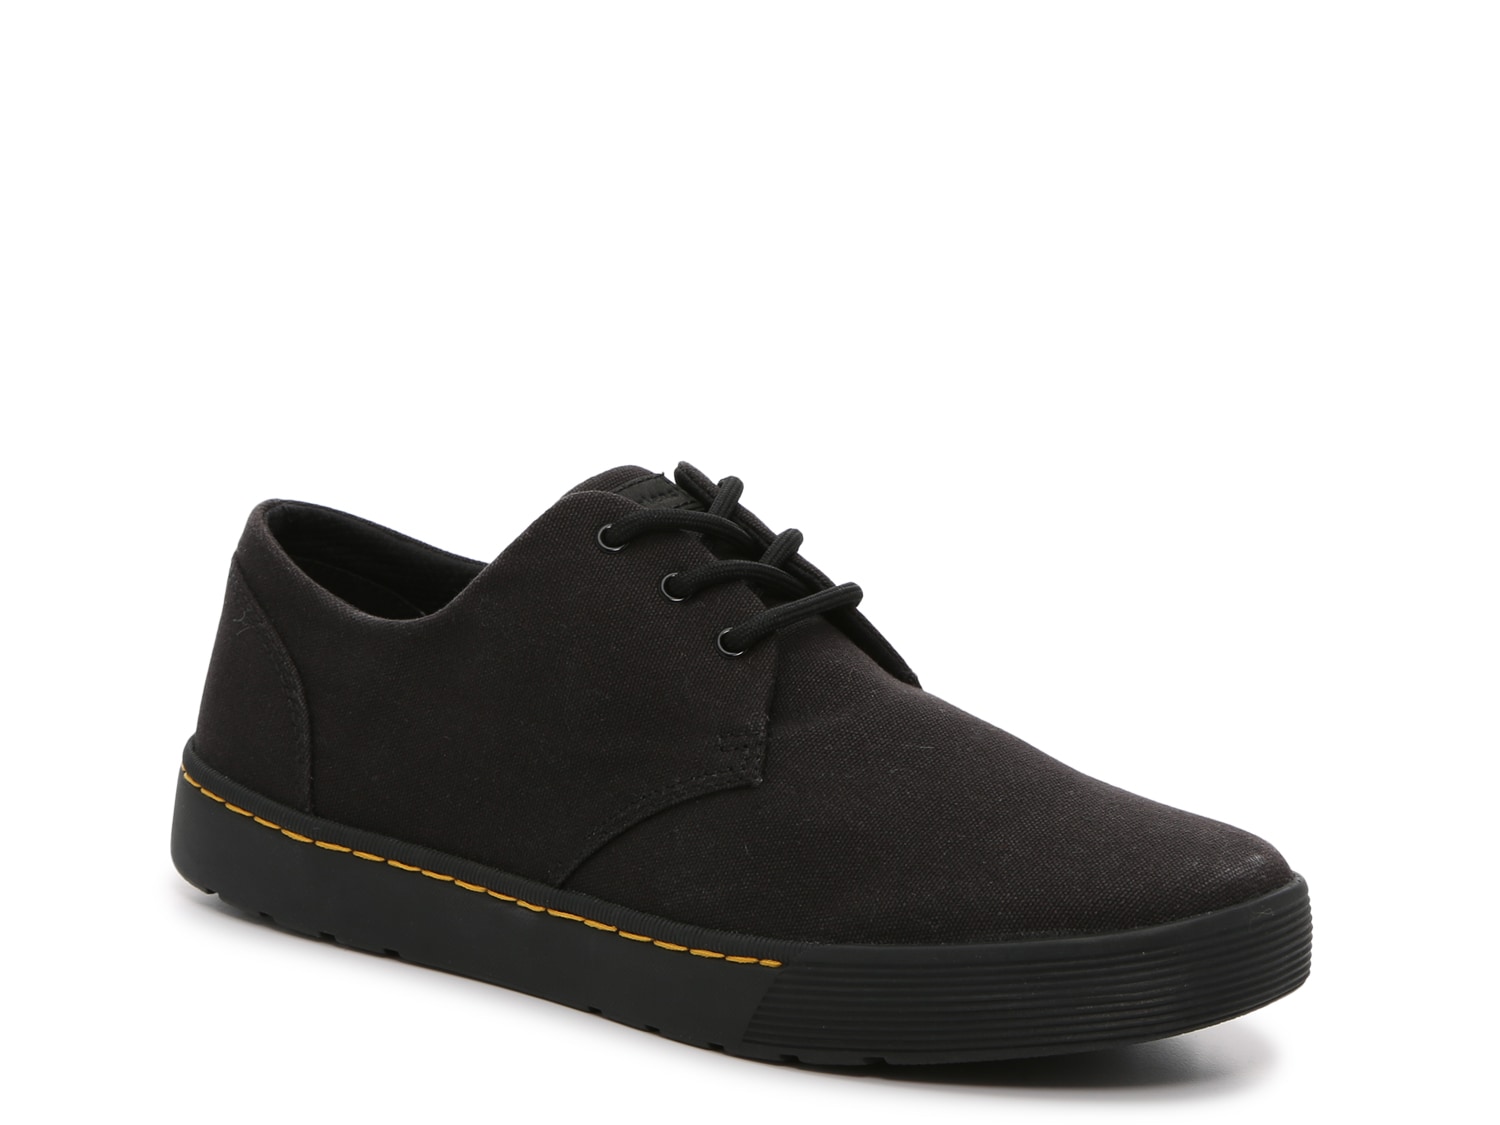 Dr. Martens Cairo Lo - Men's - Shipping | DSW